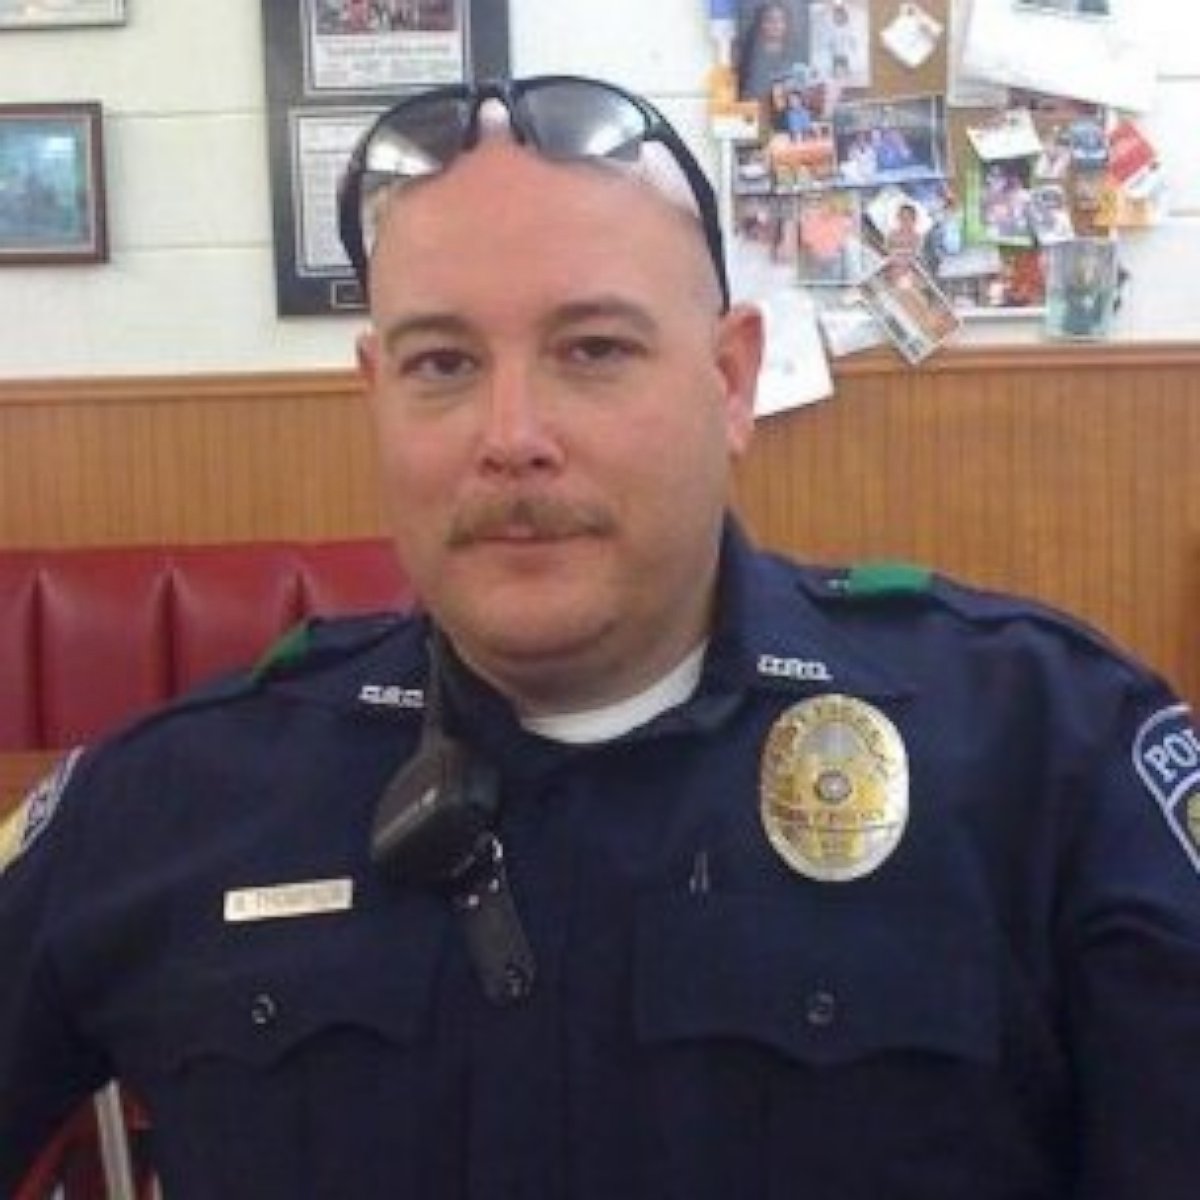 PHOTO: Dallas Area Rapid Transit confirmed officer Brent Thompson, 43, was shot and killed during anti-police brutality protests in downtown Dallas on July, 7th, 2016.